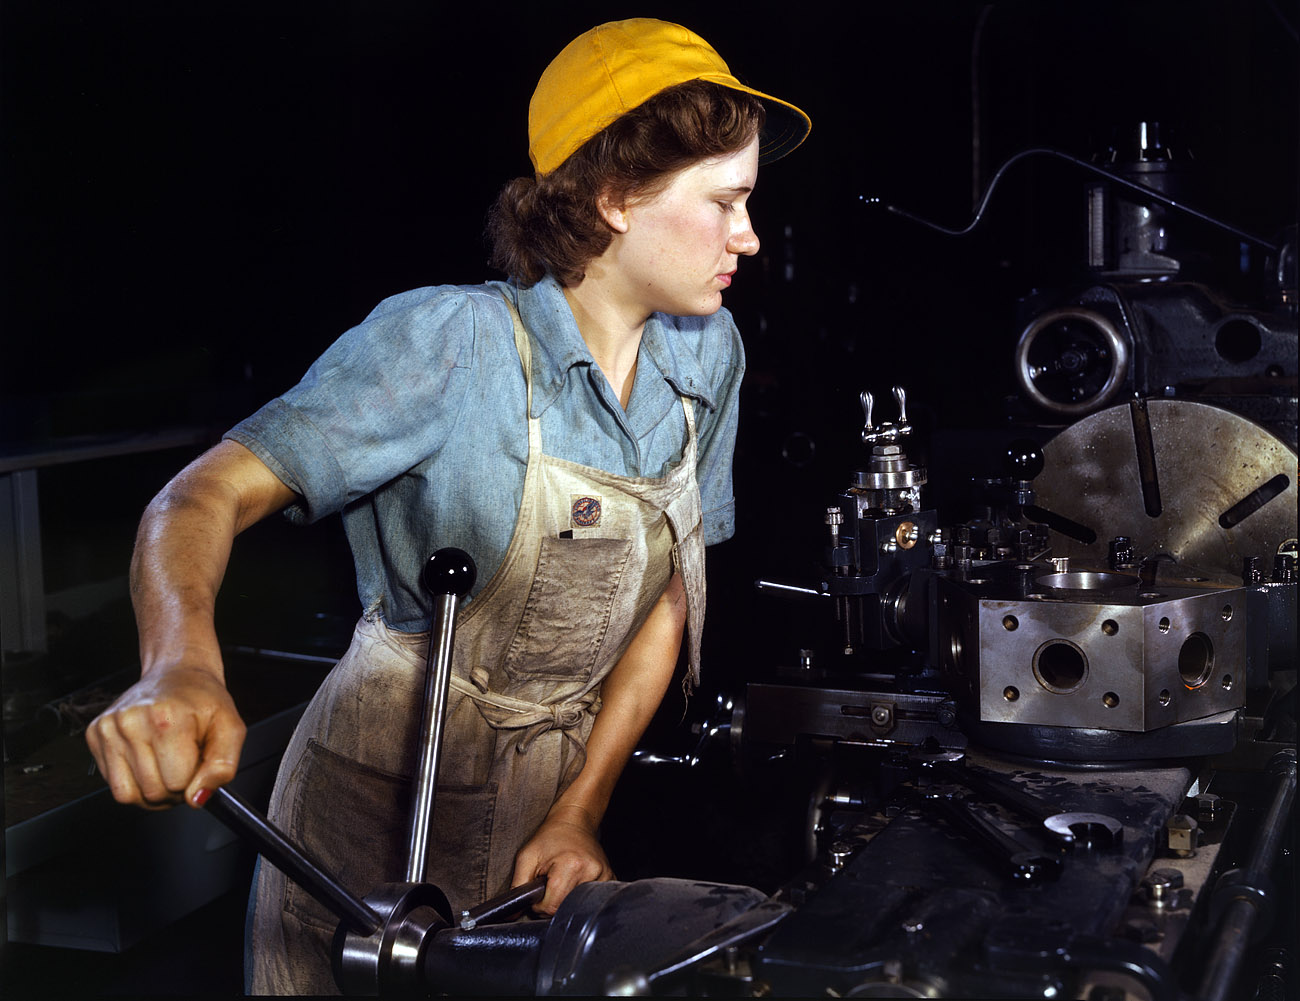 October 1942. Lathe operator machining parts for transport planes at the Consolidated Aircraft plant in Fort Worth, Texas. View full size. 4x5 Kodachrome transparency by Howard Hollem, Office of War Information.